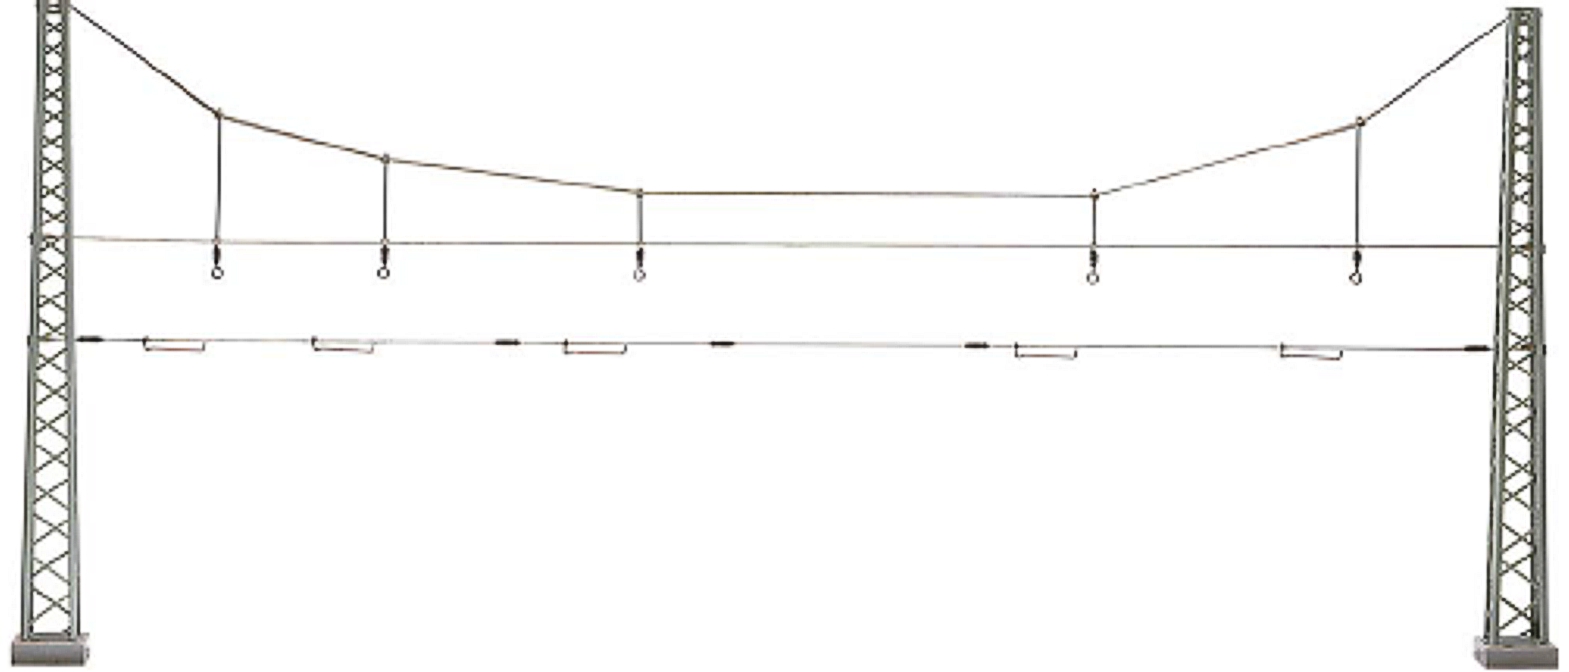 Profile cross span, 0,7mm, kit without masts